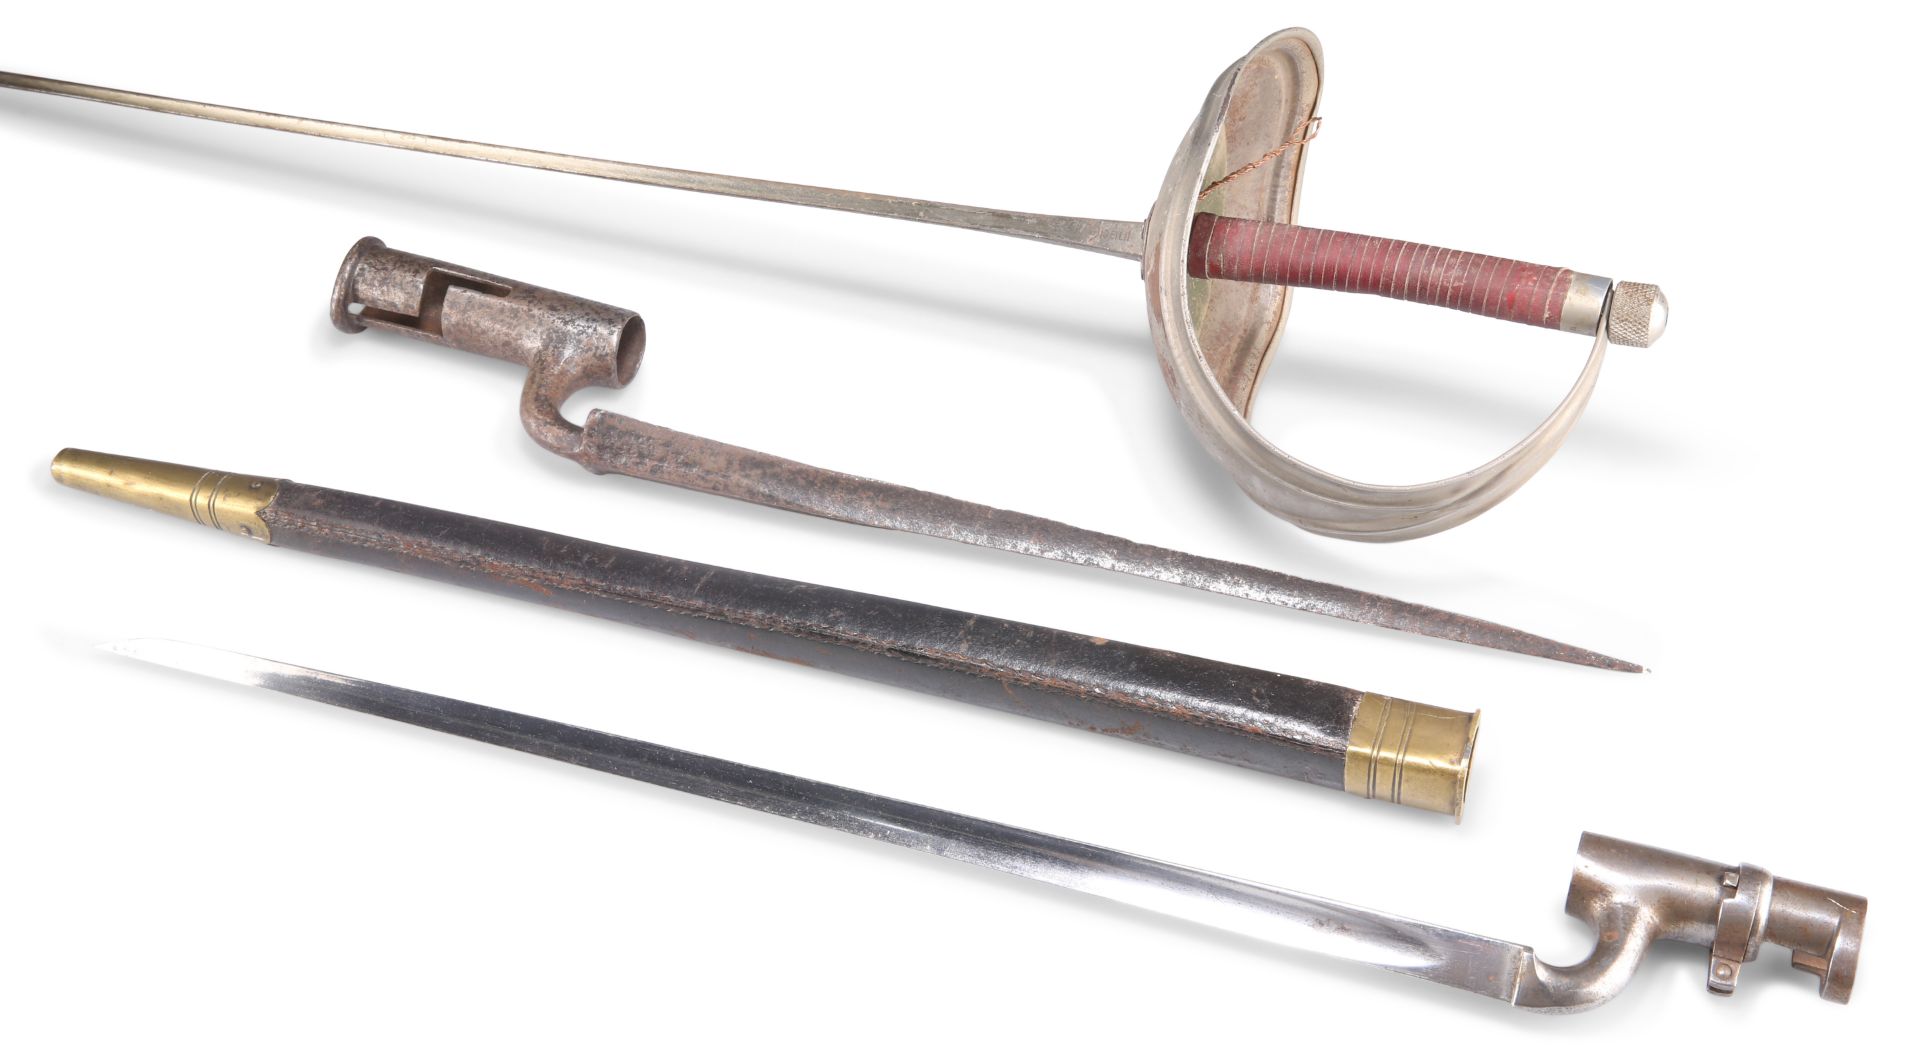 TWO STEEL SOCKET BAYONETS AND A FENCING SABRE